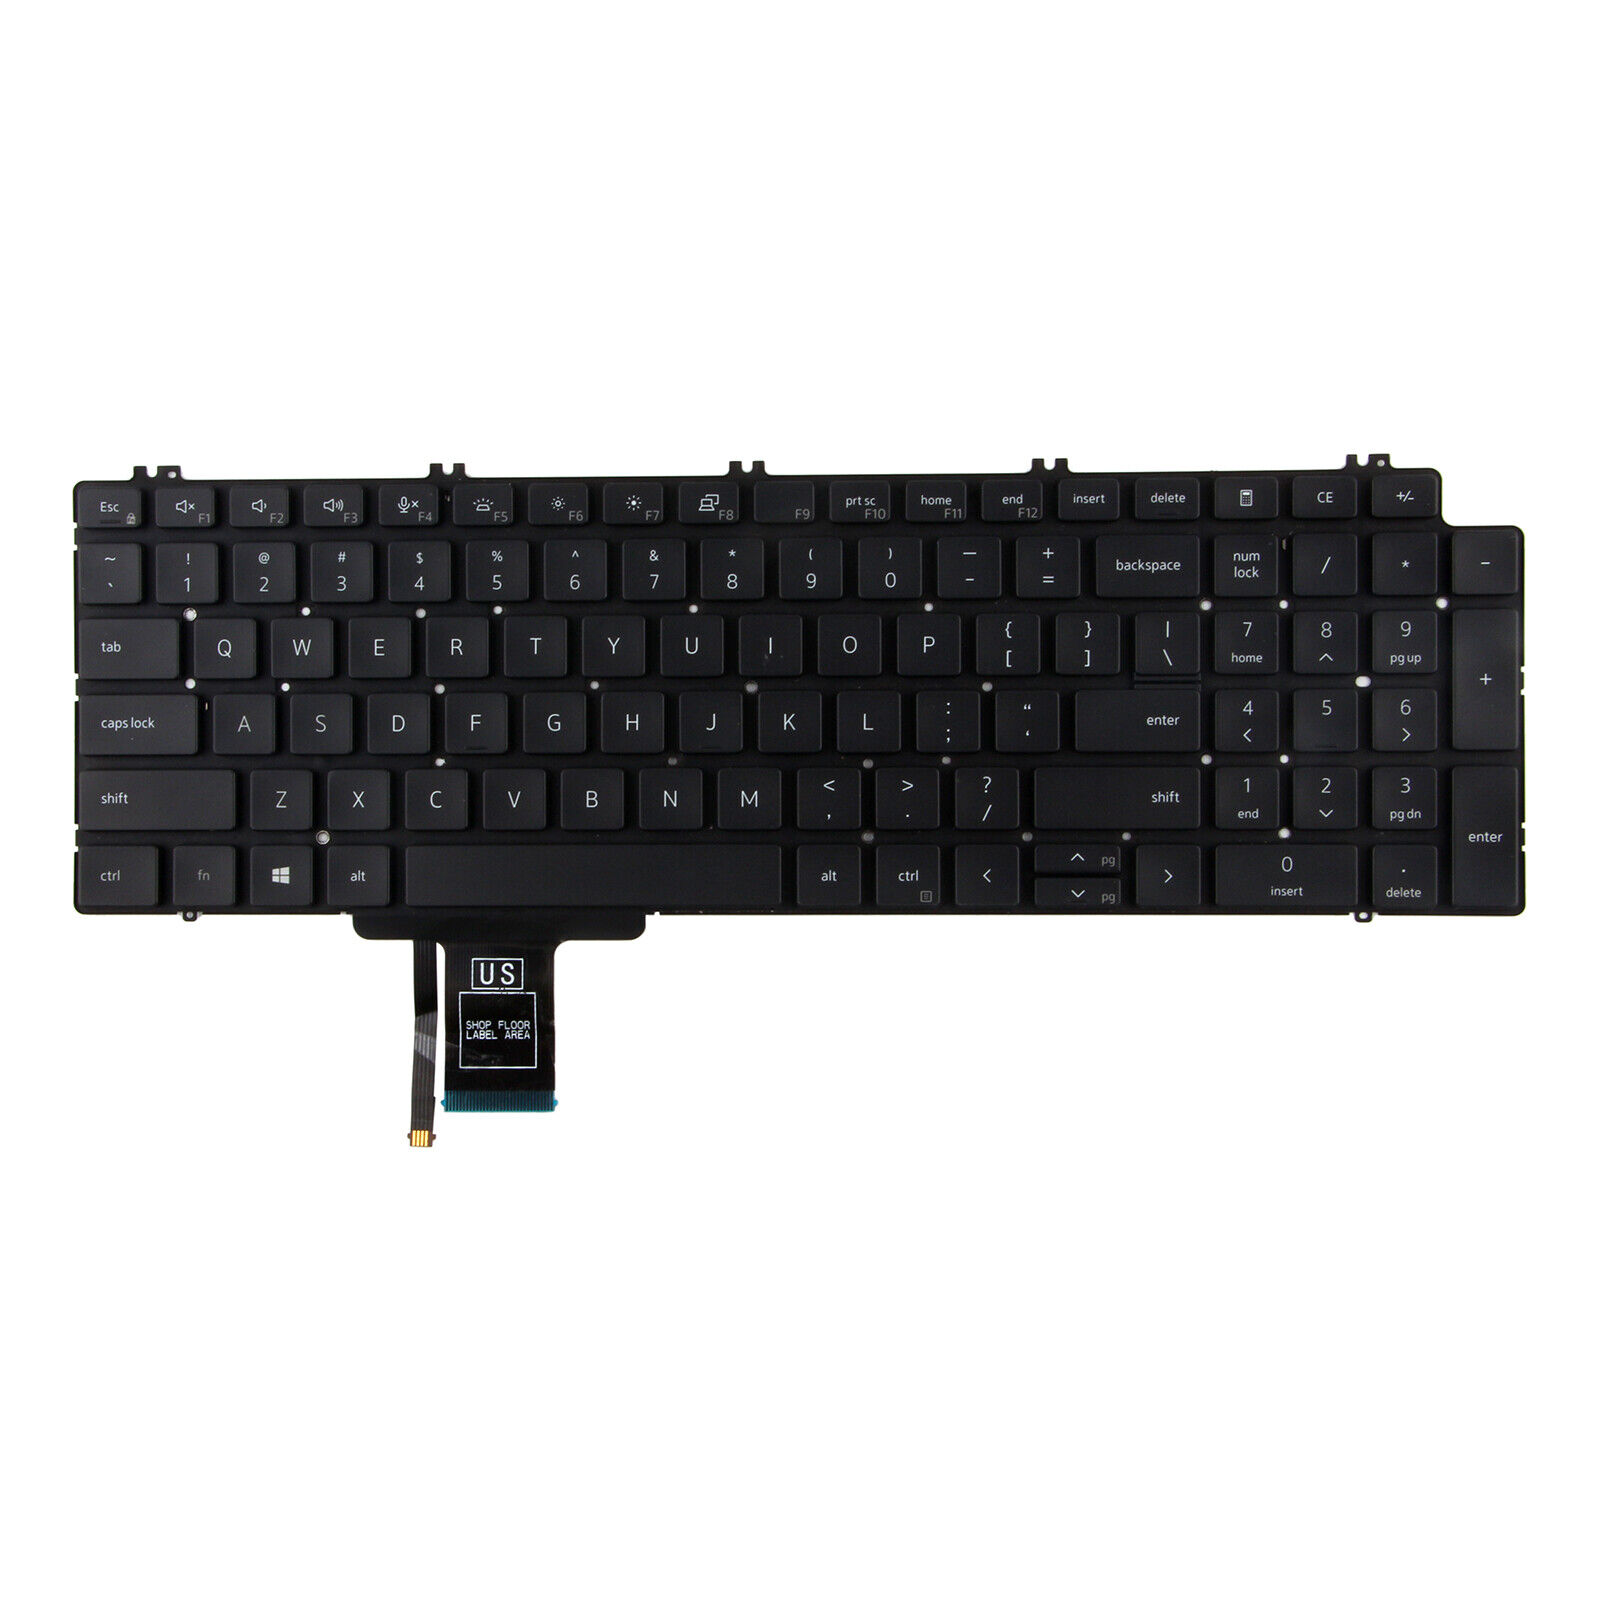 Genuine US Keyboard with Backlight for Dell Precision 7550 7560 7750 7760 713DM